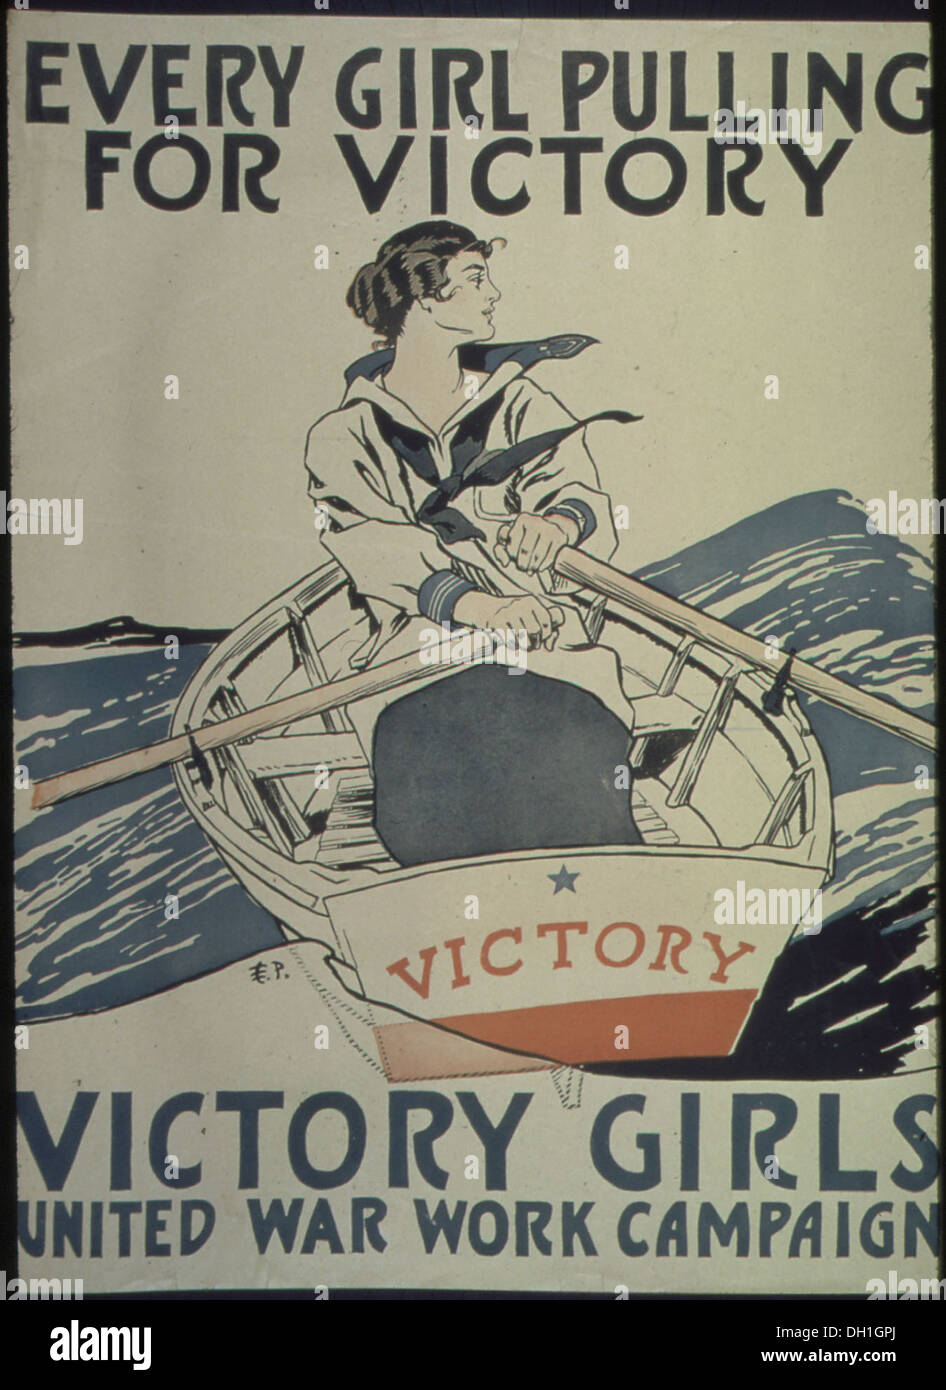 Every Girl Pulling For Victory. Victory Girls. United War Work Campaign. 512614 Stock Photo